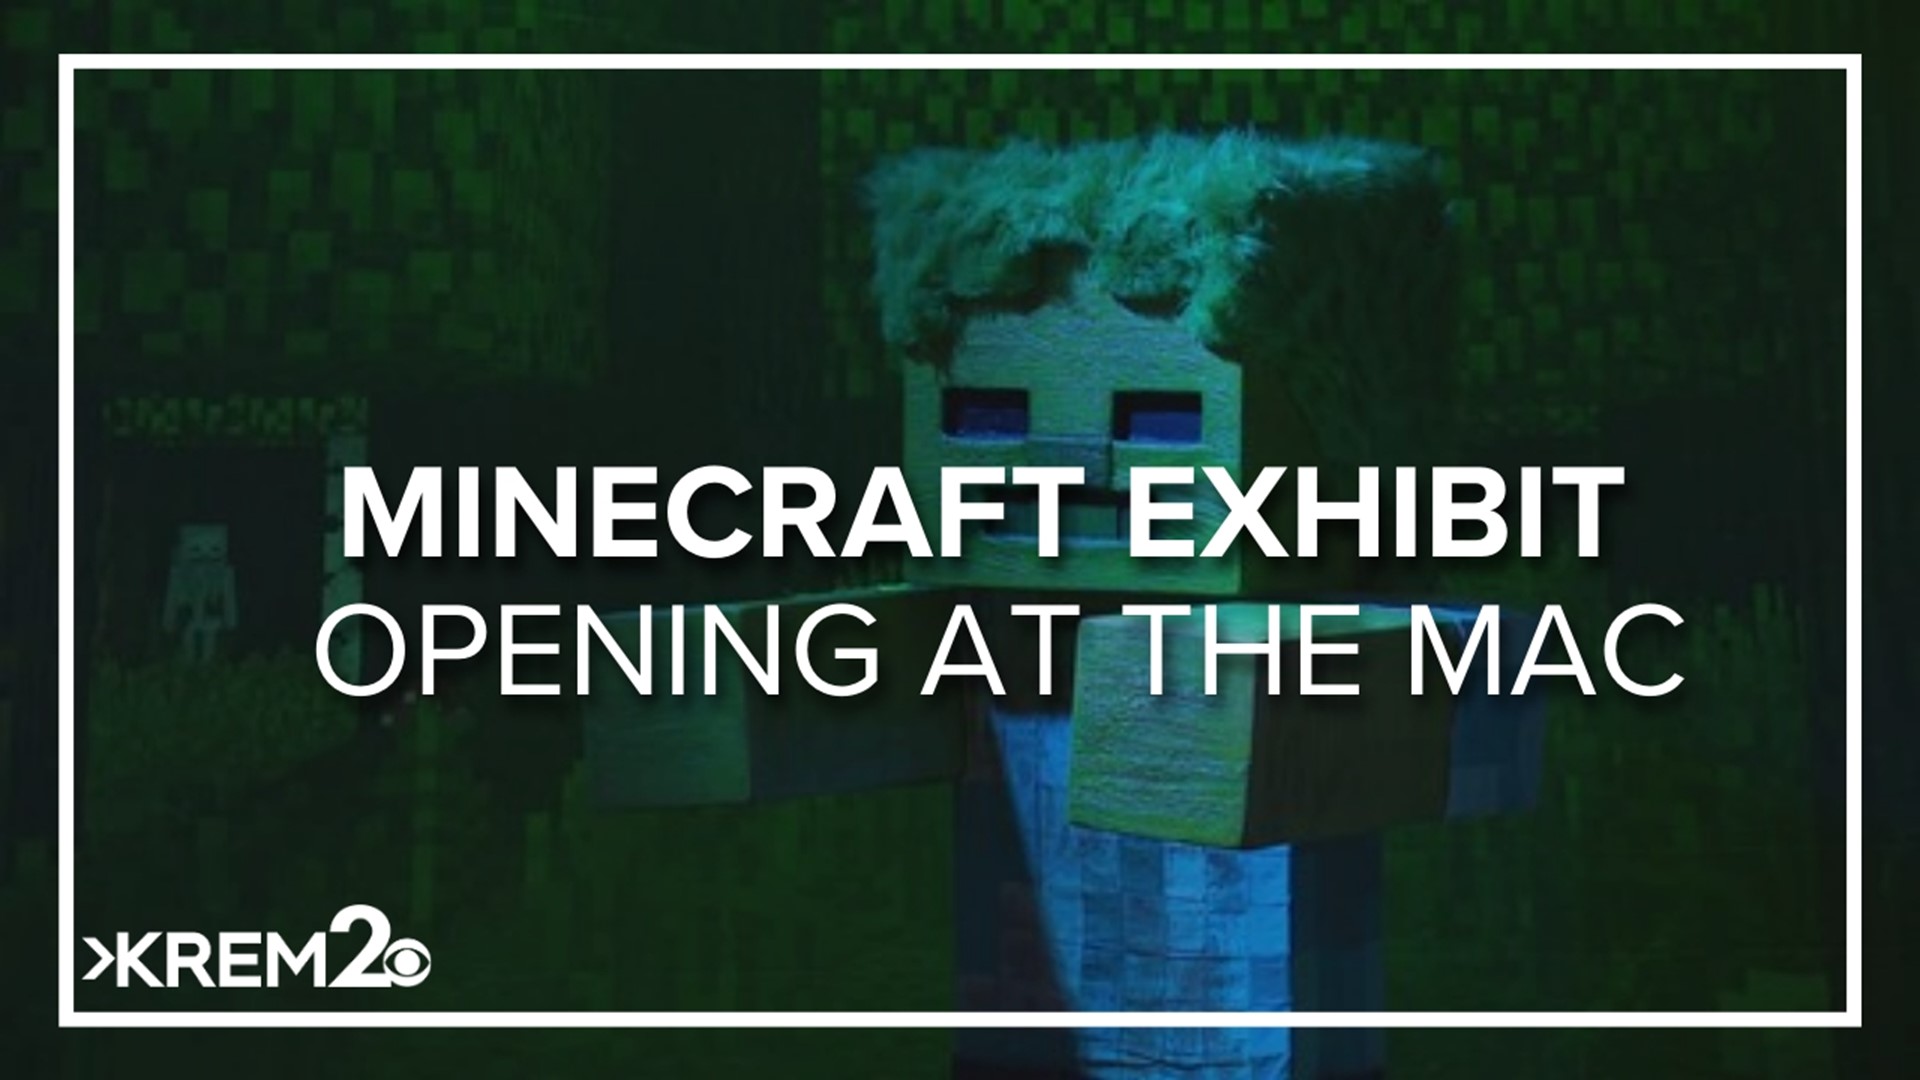 The life-size Minecraft creatures, day-night cycle, audio effects and scenic backdrops take place within the exhibit.